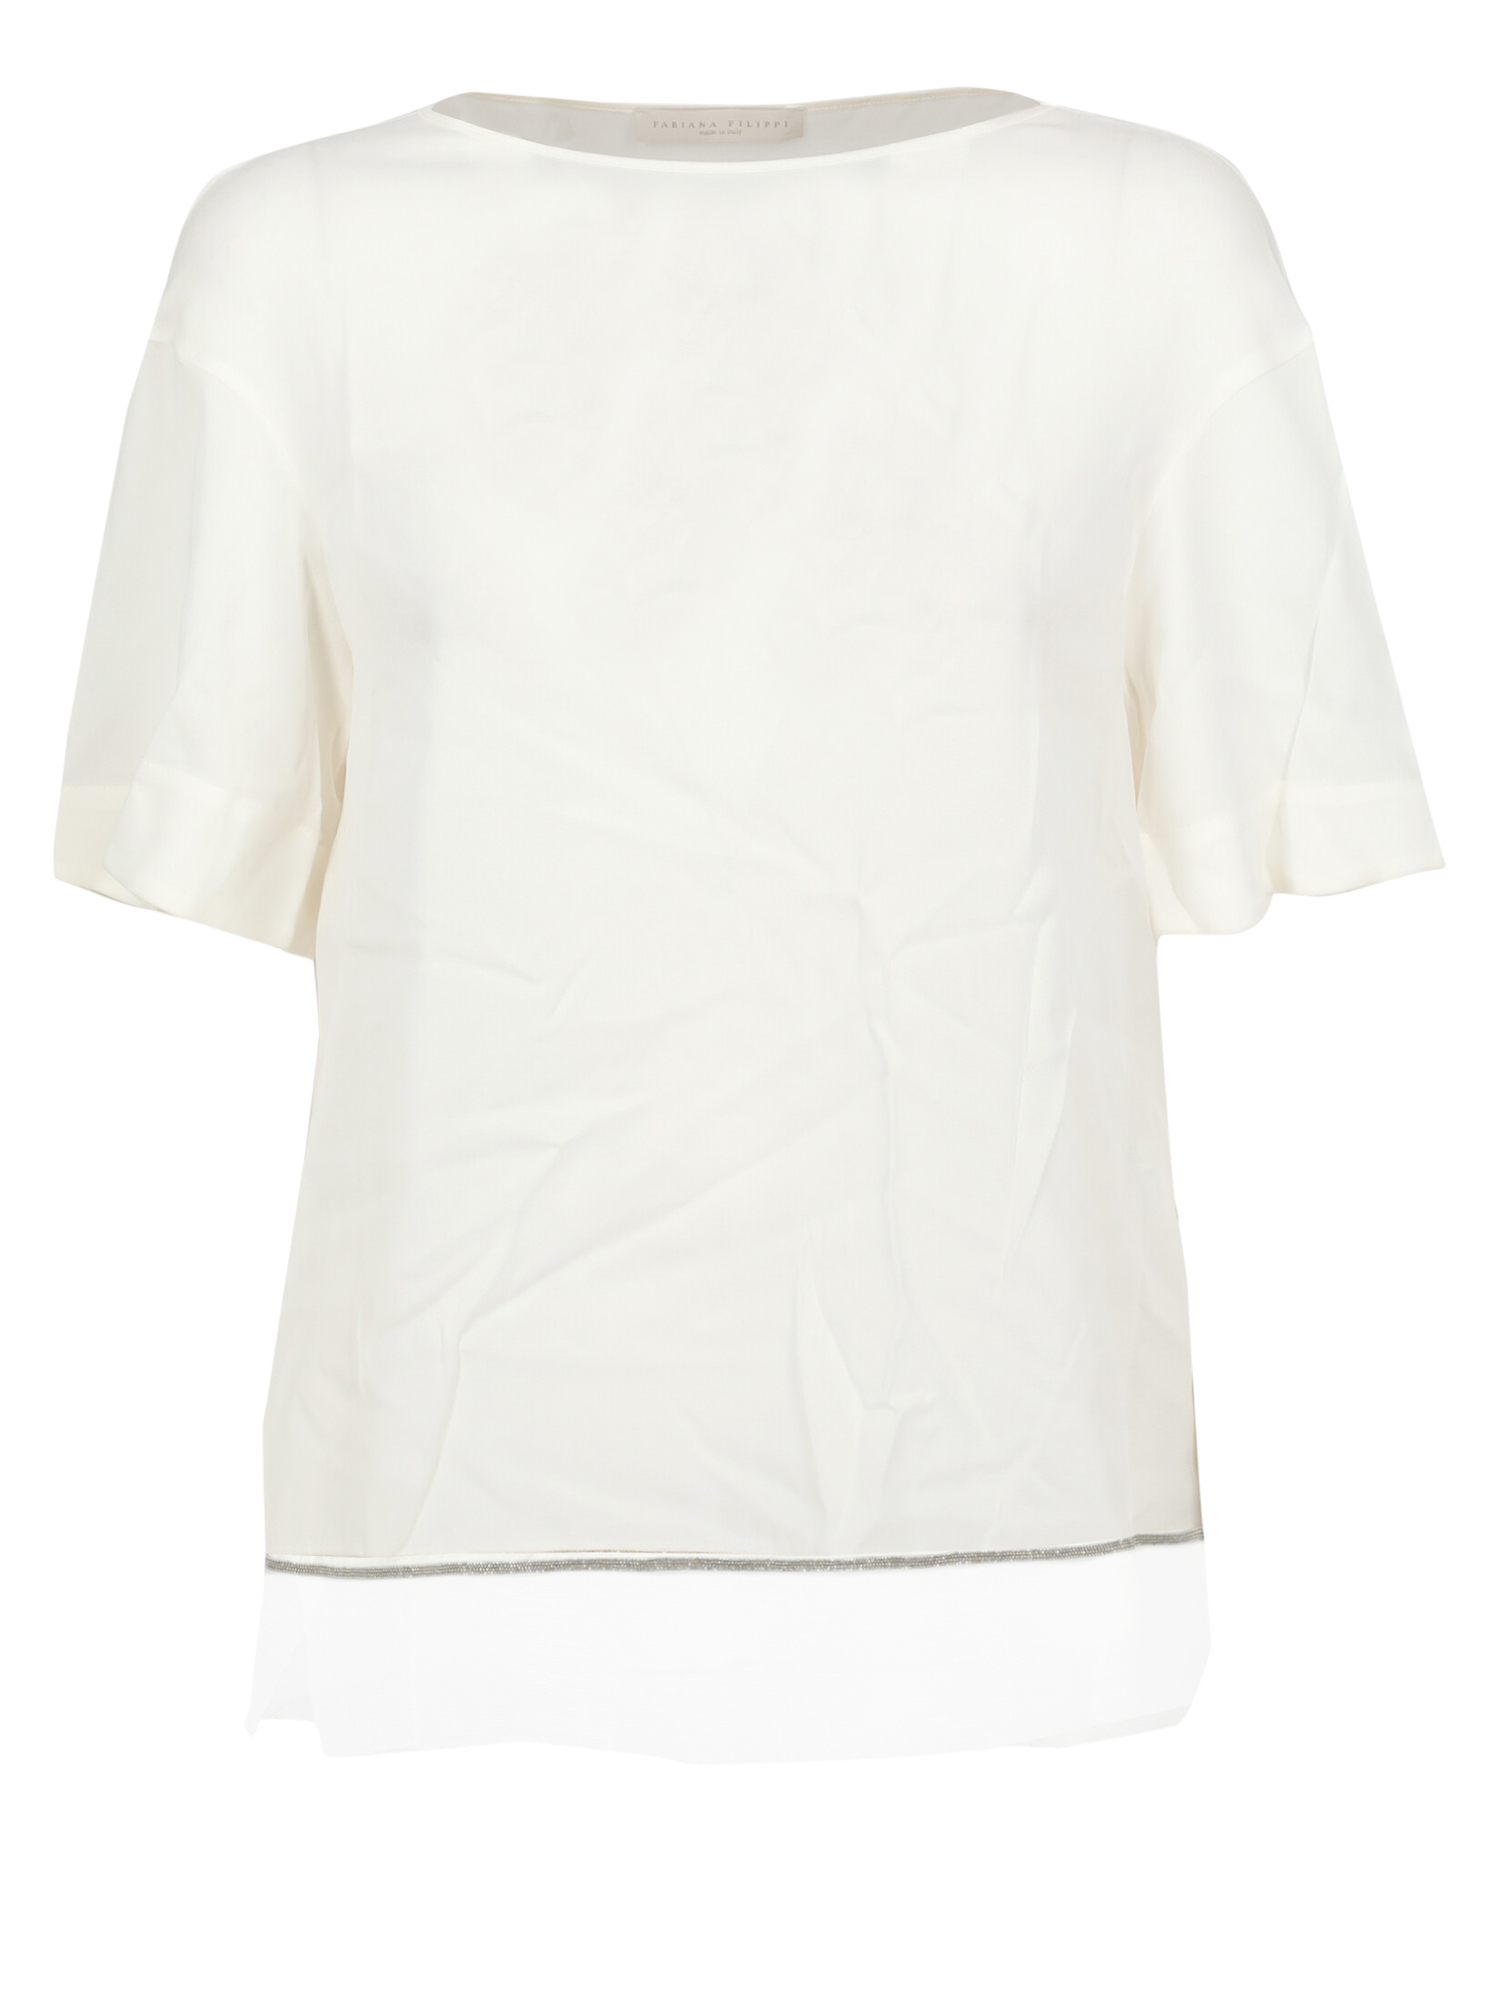 Condition: New With Tag, Solid Color Fabric, Color: White - M - IT 42 -